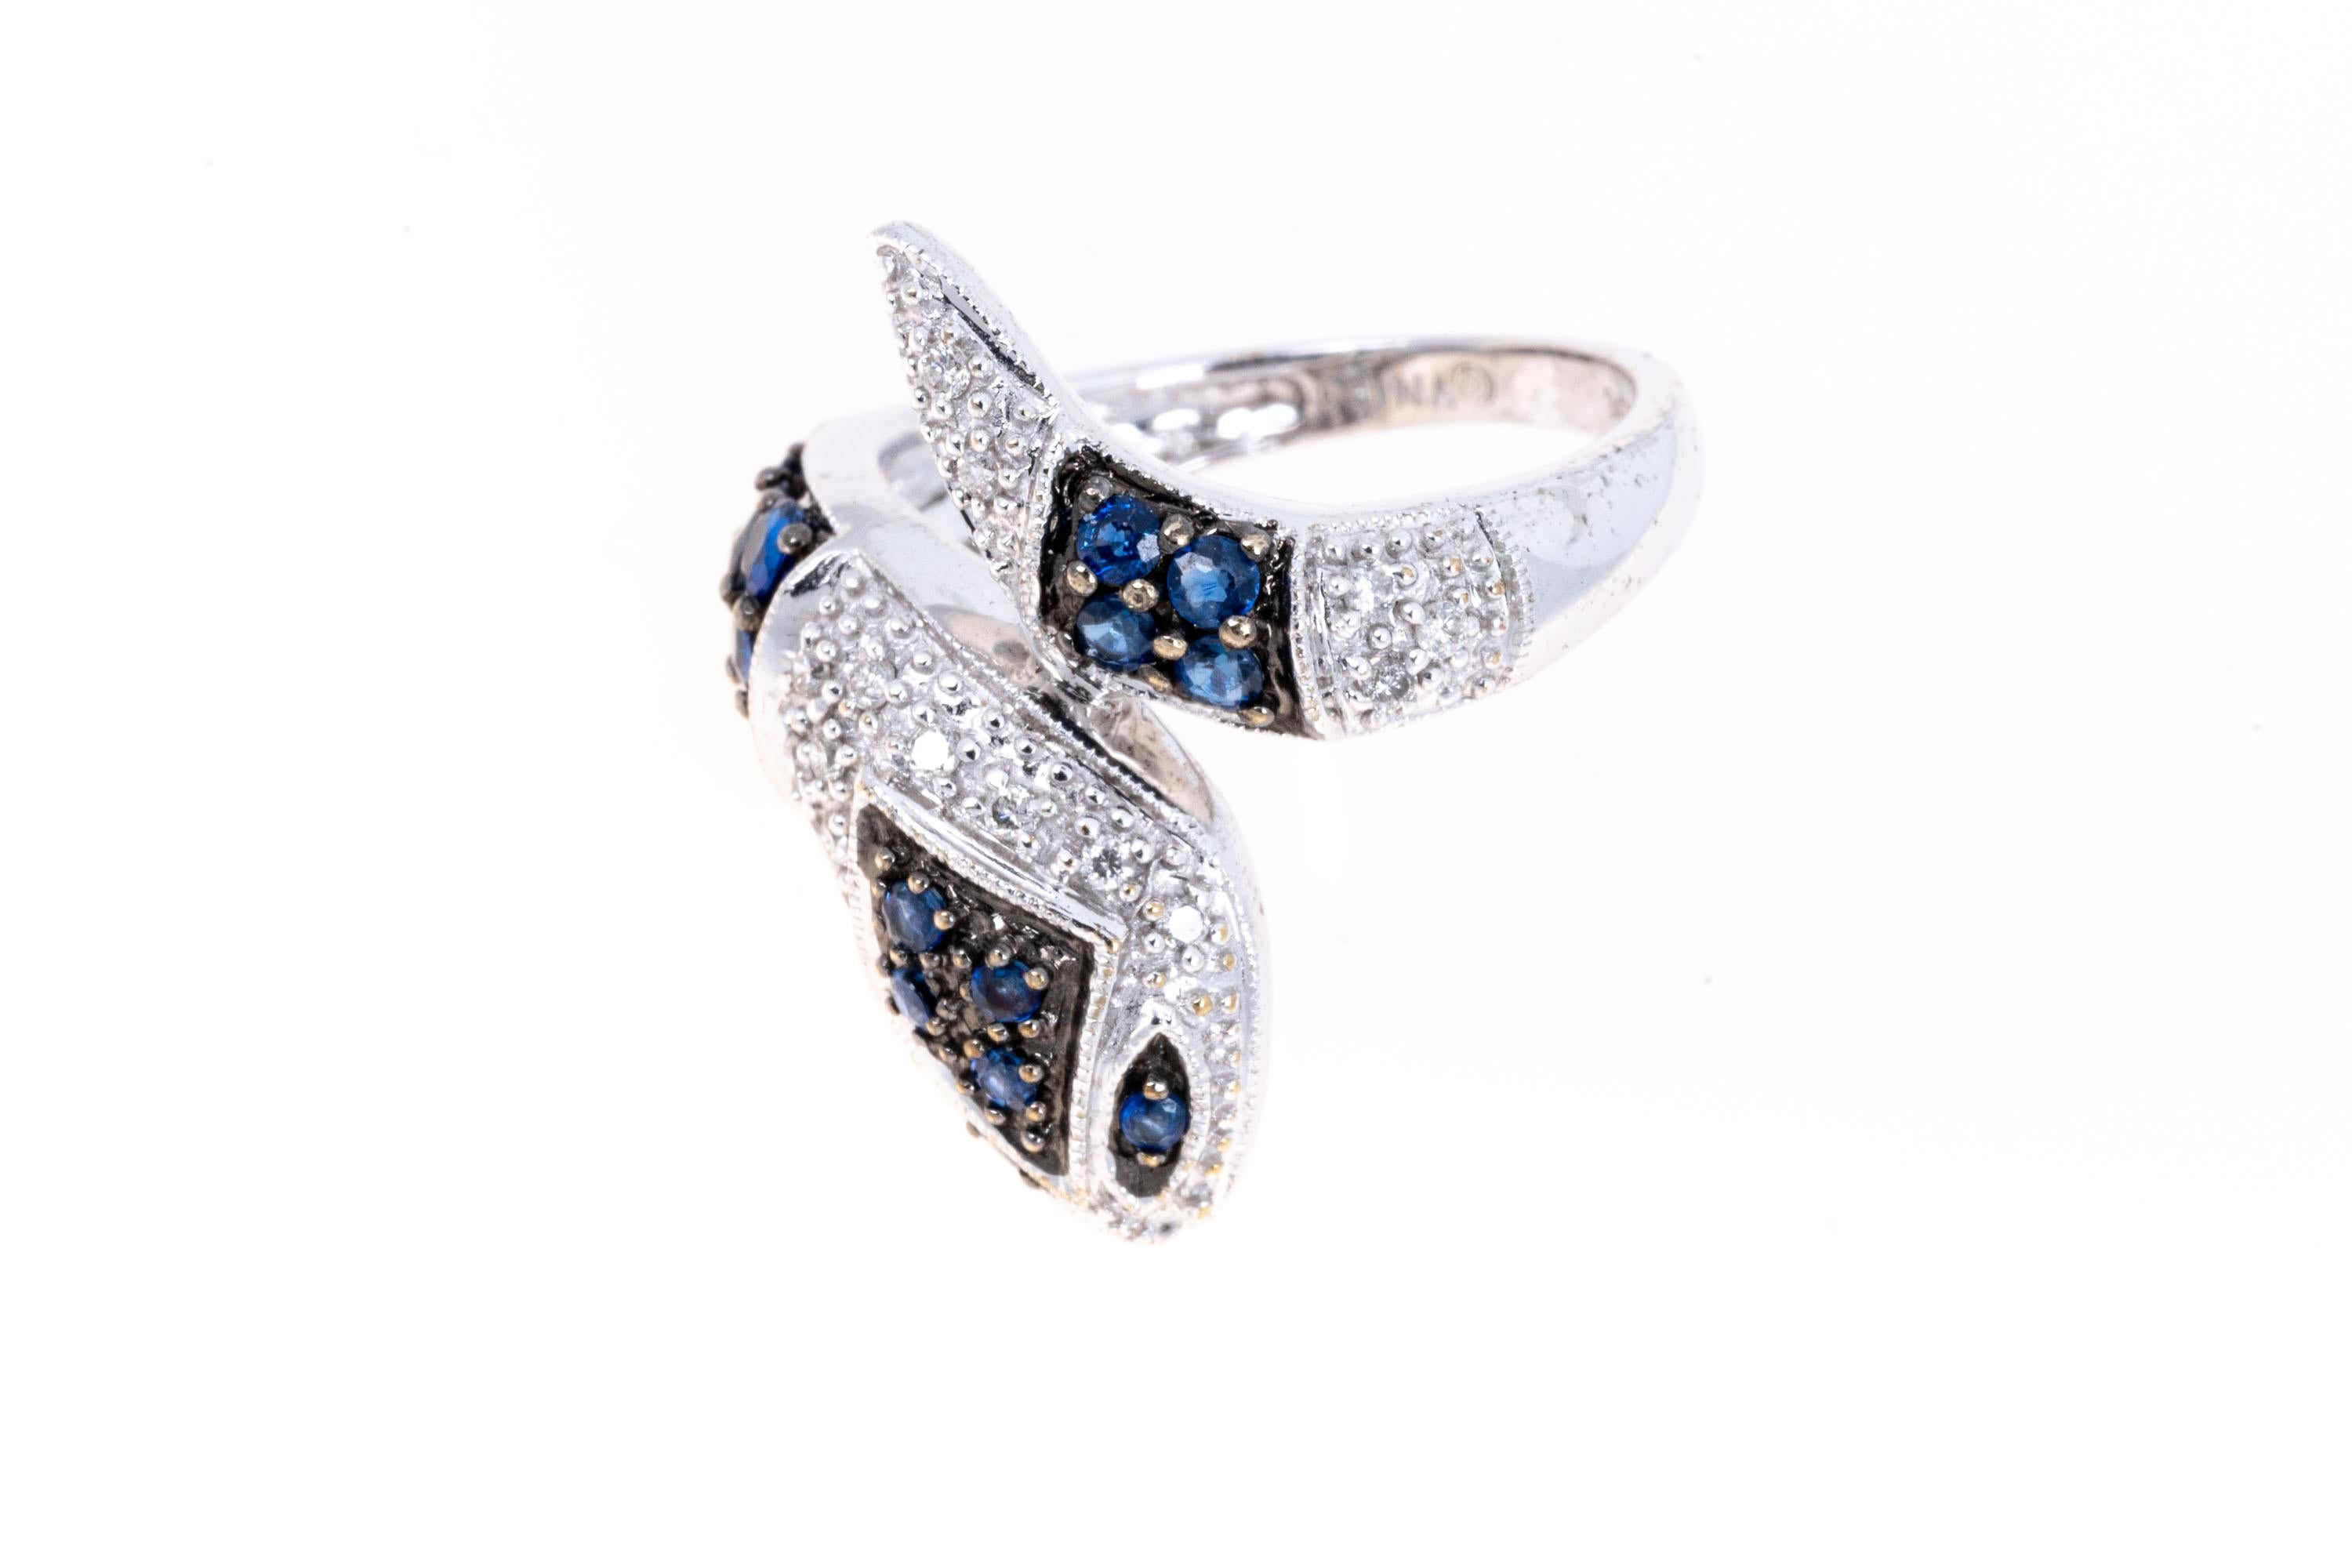 14k white gold snake ring. This charming snake is an alternating combination of prong set round diamonds (approximately 0.09 TCW) and round medium blue sapphires, approximately 0.60 TCW, coiled in a bypass style motif
Marks: 14k
Dimensions: 3/4